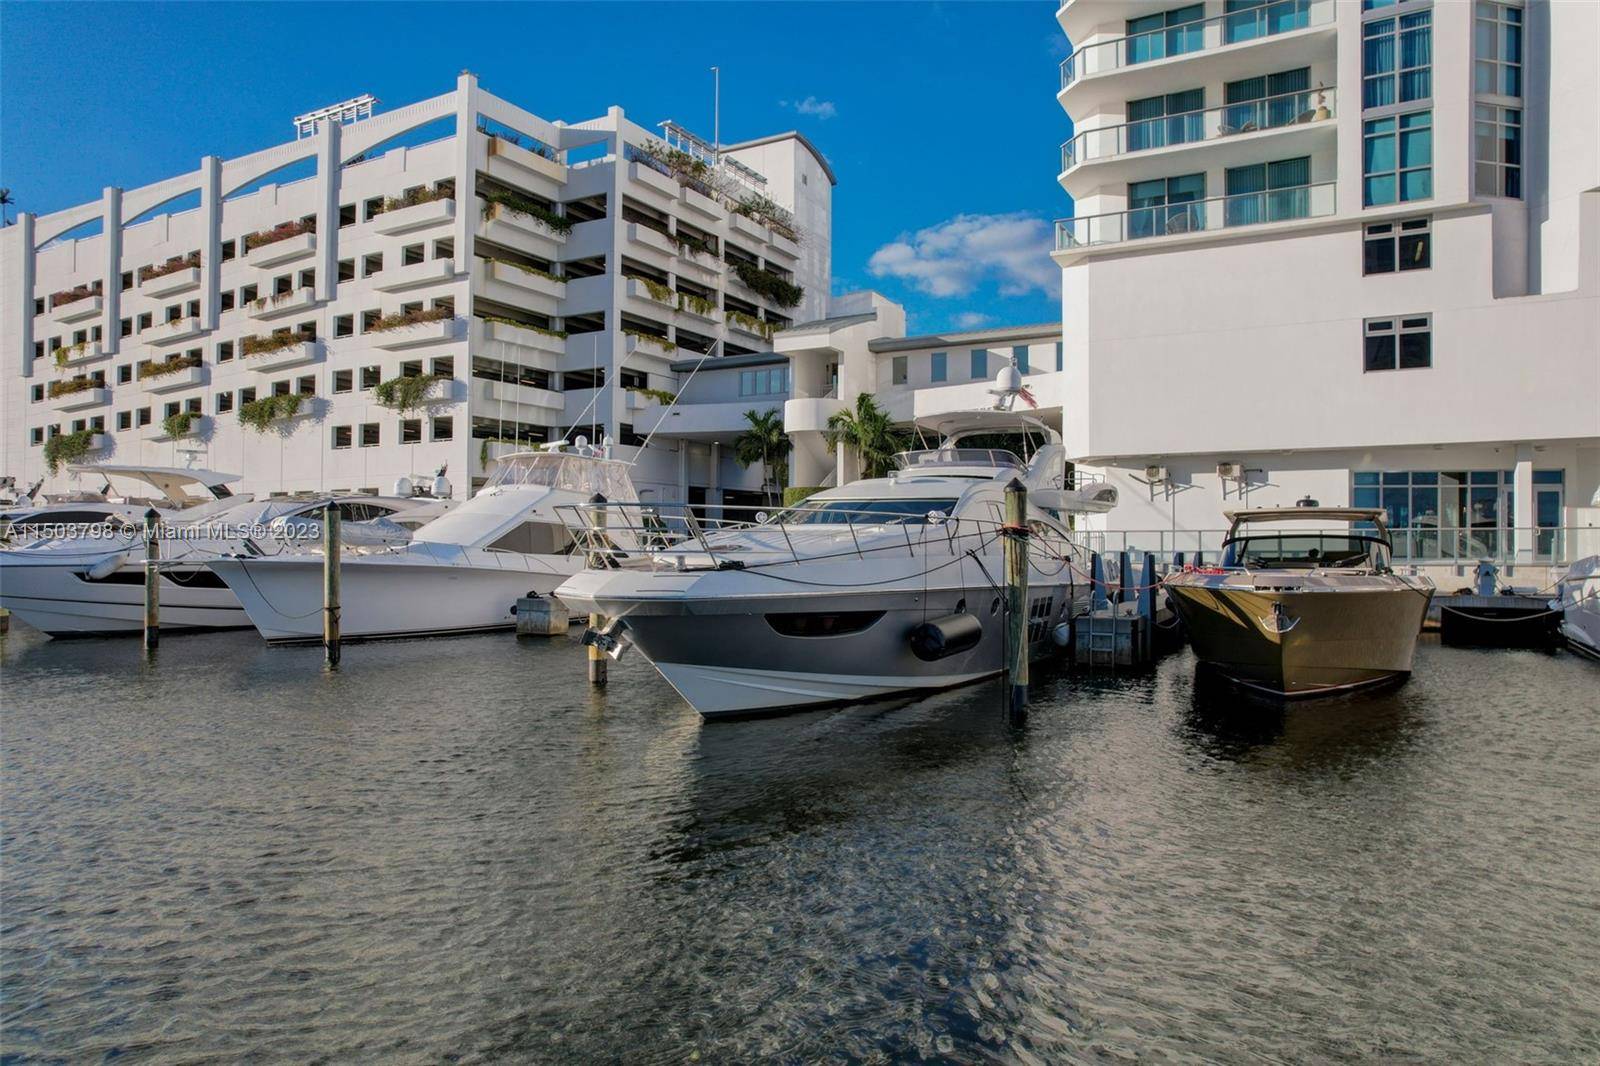 The Marina Palms a Premier Marina offers an ideal location and first class marina facilities.